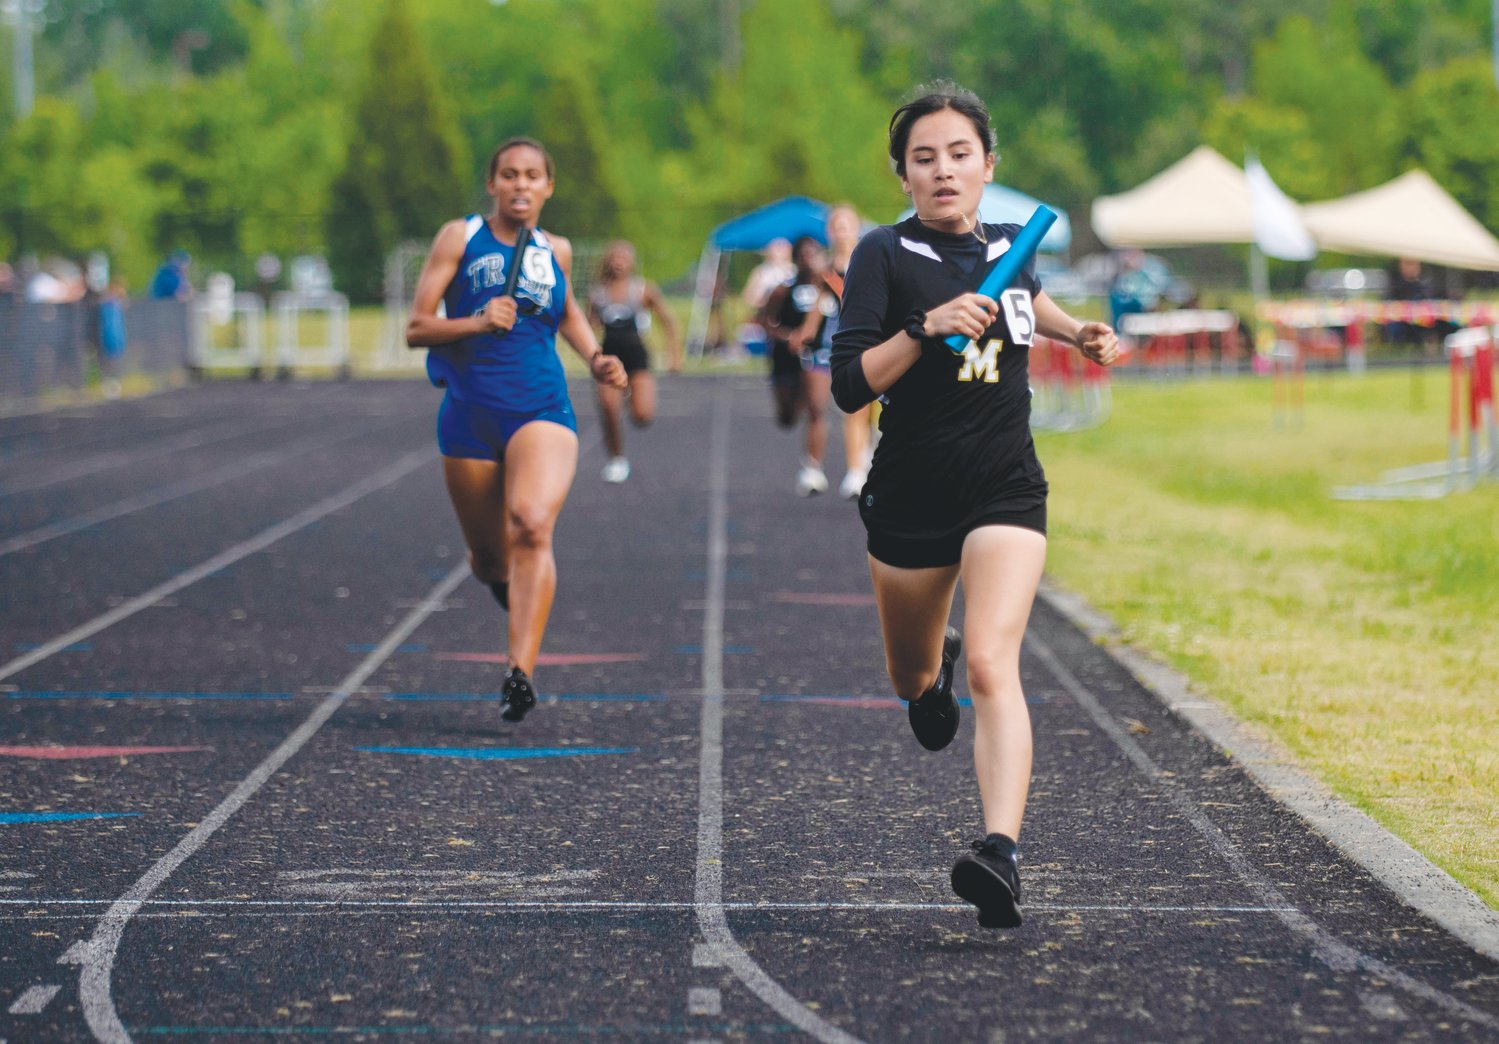 Jordan-Matthews senior Jasmine Basilio (in black) crosses the finish line in the women's 4x400-meter relay during the NCHSAA 2A.Mideast Regionals at Franklinton High School last Saturday. Basilio helped lead the relay team to a gold-medal win, qualifying it for states.